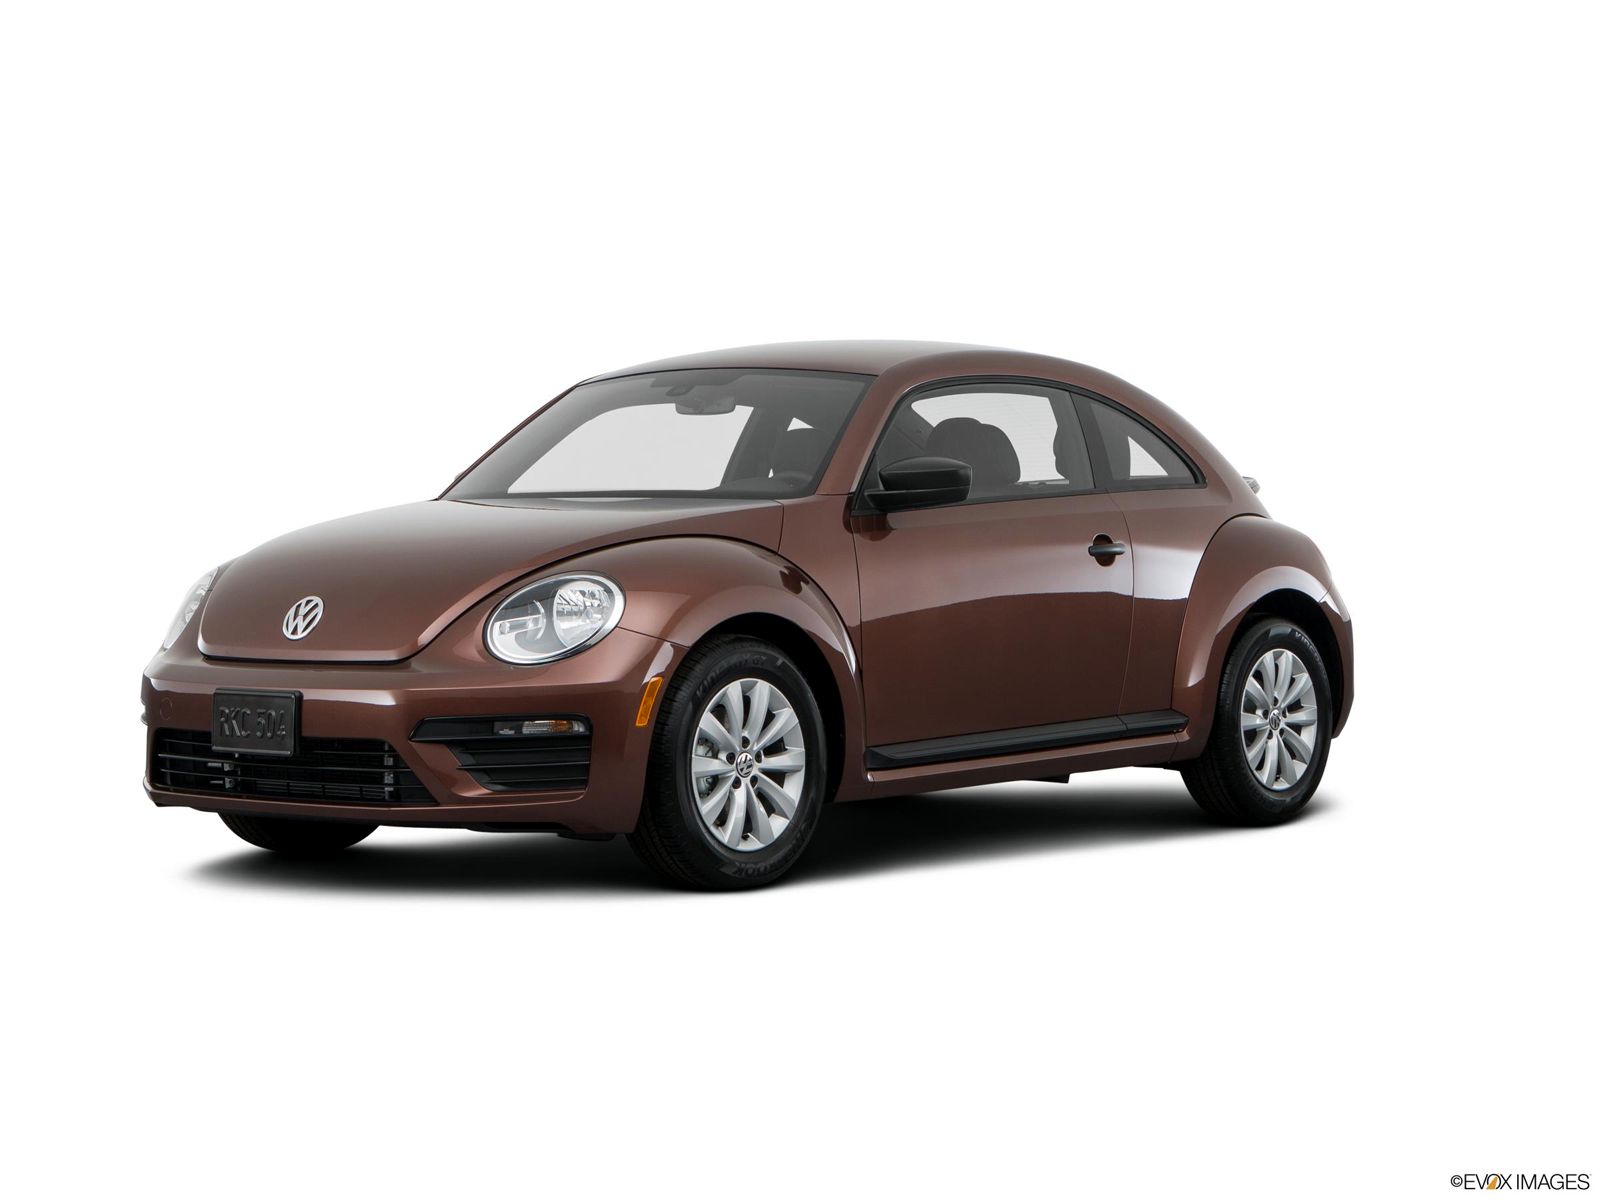 2017 Volkswagen Beetle Research, Photos, Specs and Expertise | CarMax